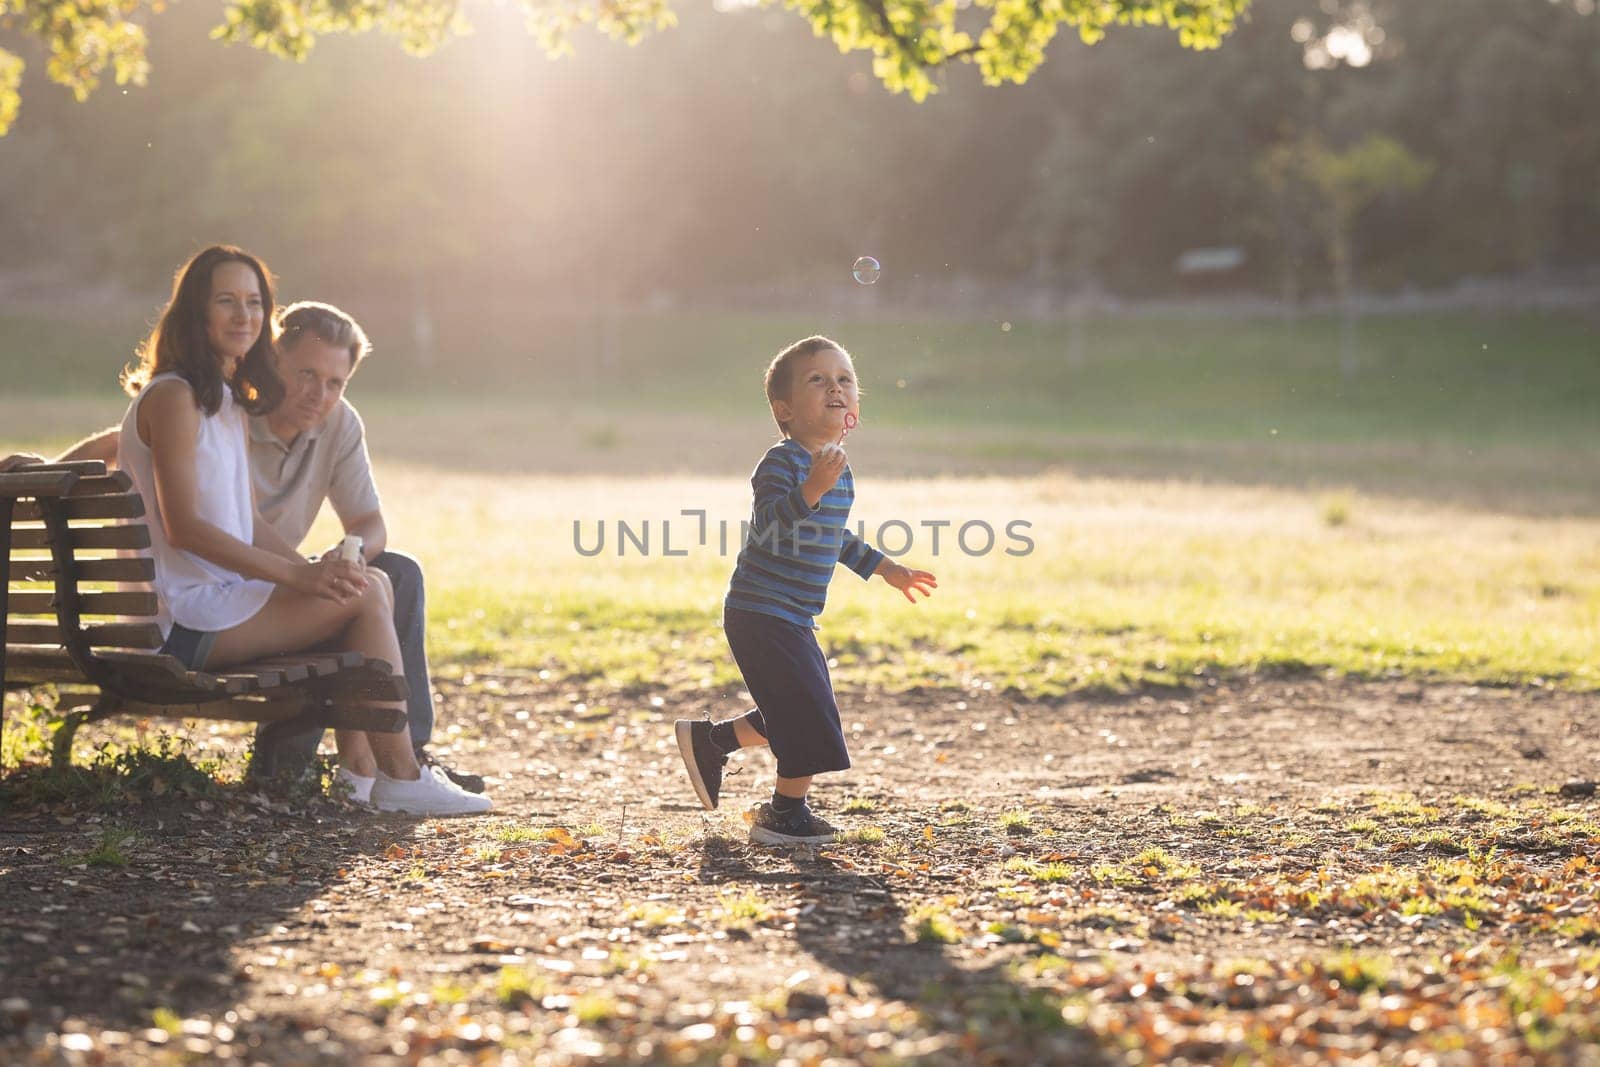 Cute white family in the park - a little boy chasing soap bubbles and his parents watching him. Mid shot